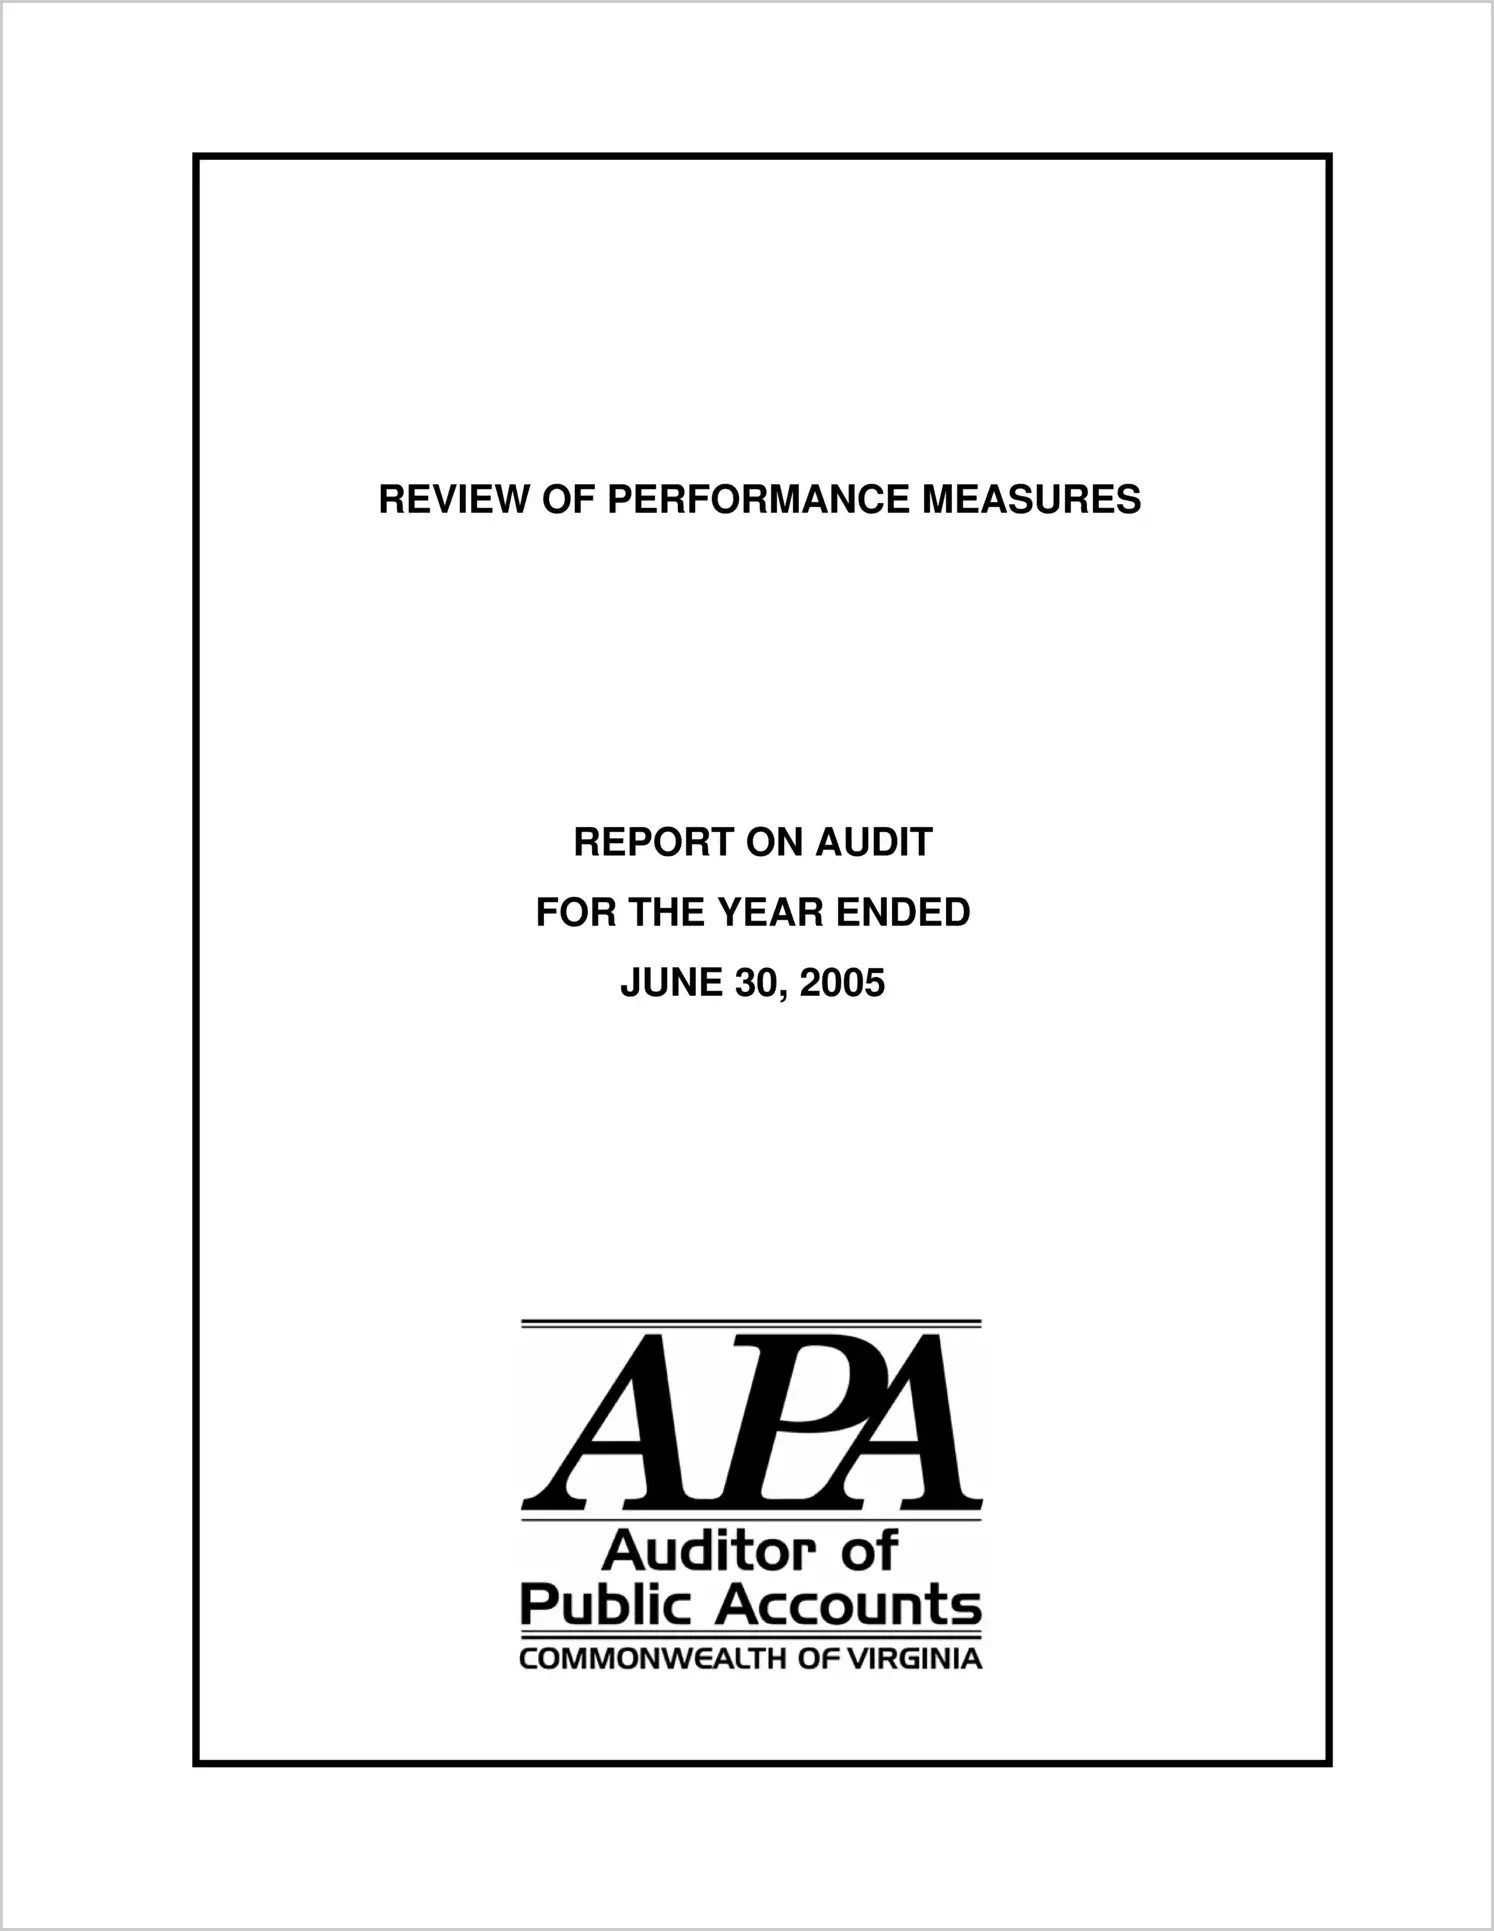 Review of Performance Measures for fiscal year ended June 30, 2005